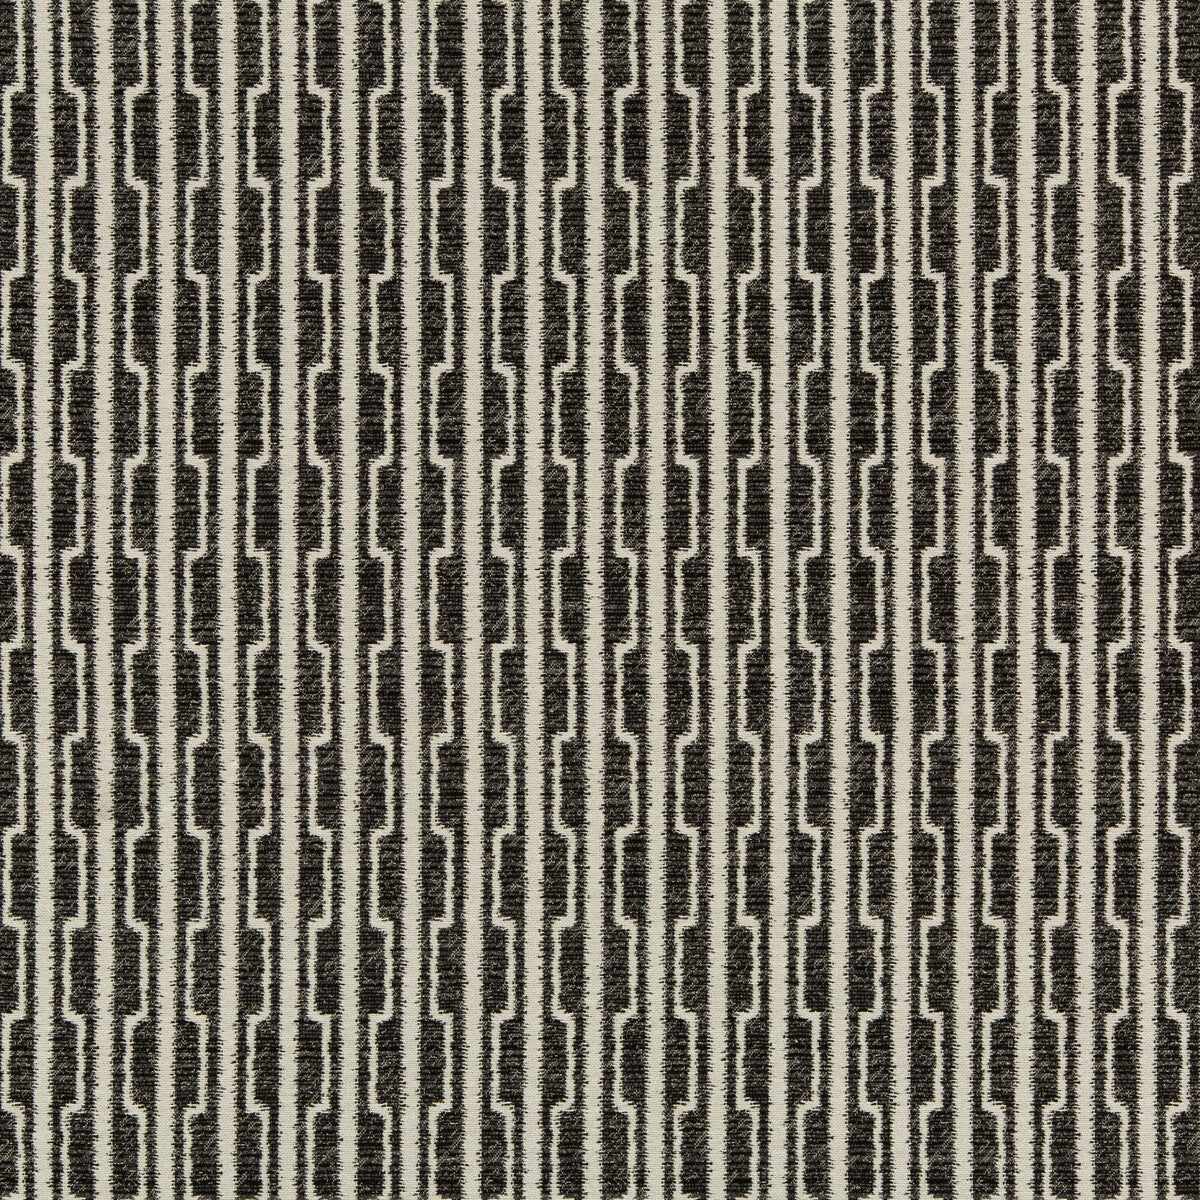 Kravet Design fabric in 36084-81 color - pattern 36084.81.0 - by Kravet Design in the Inside Out Performance Fabrics collection